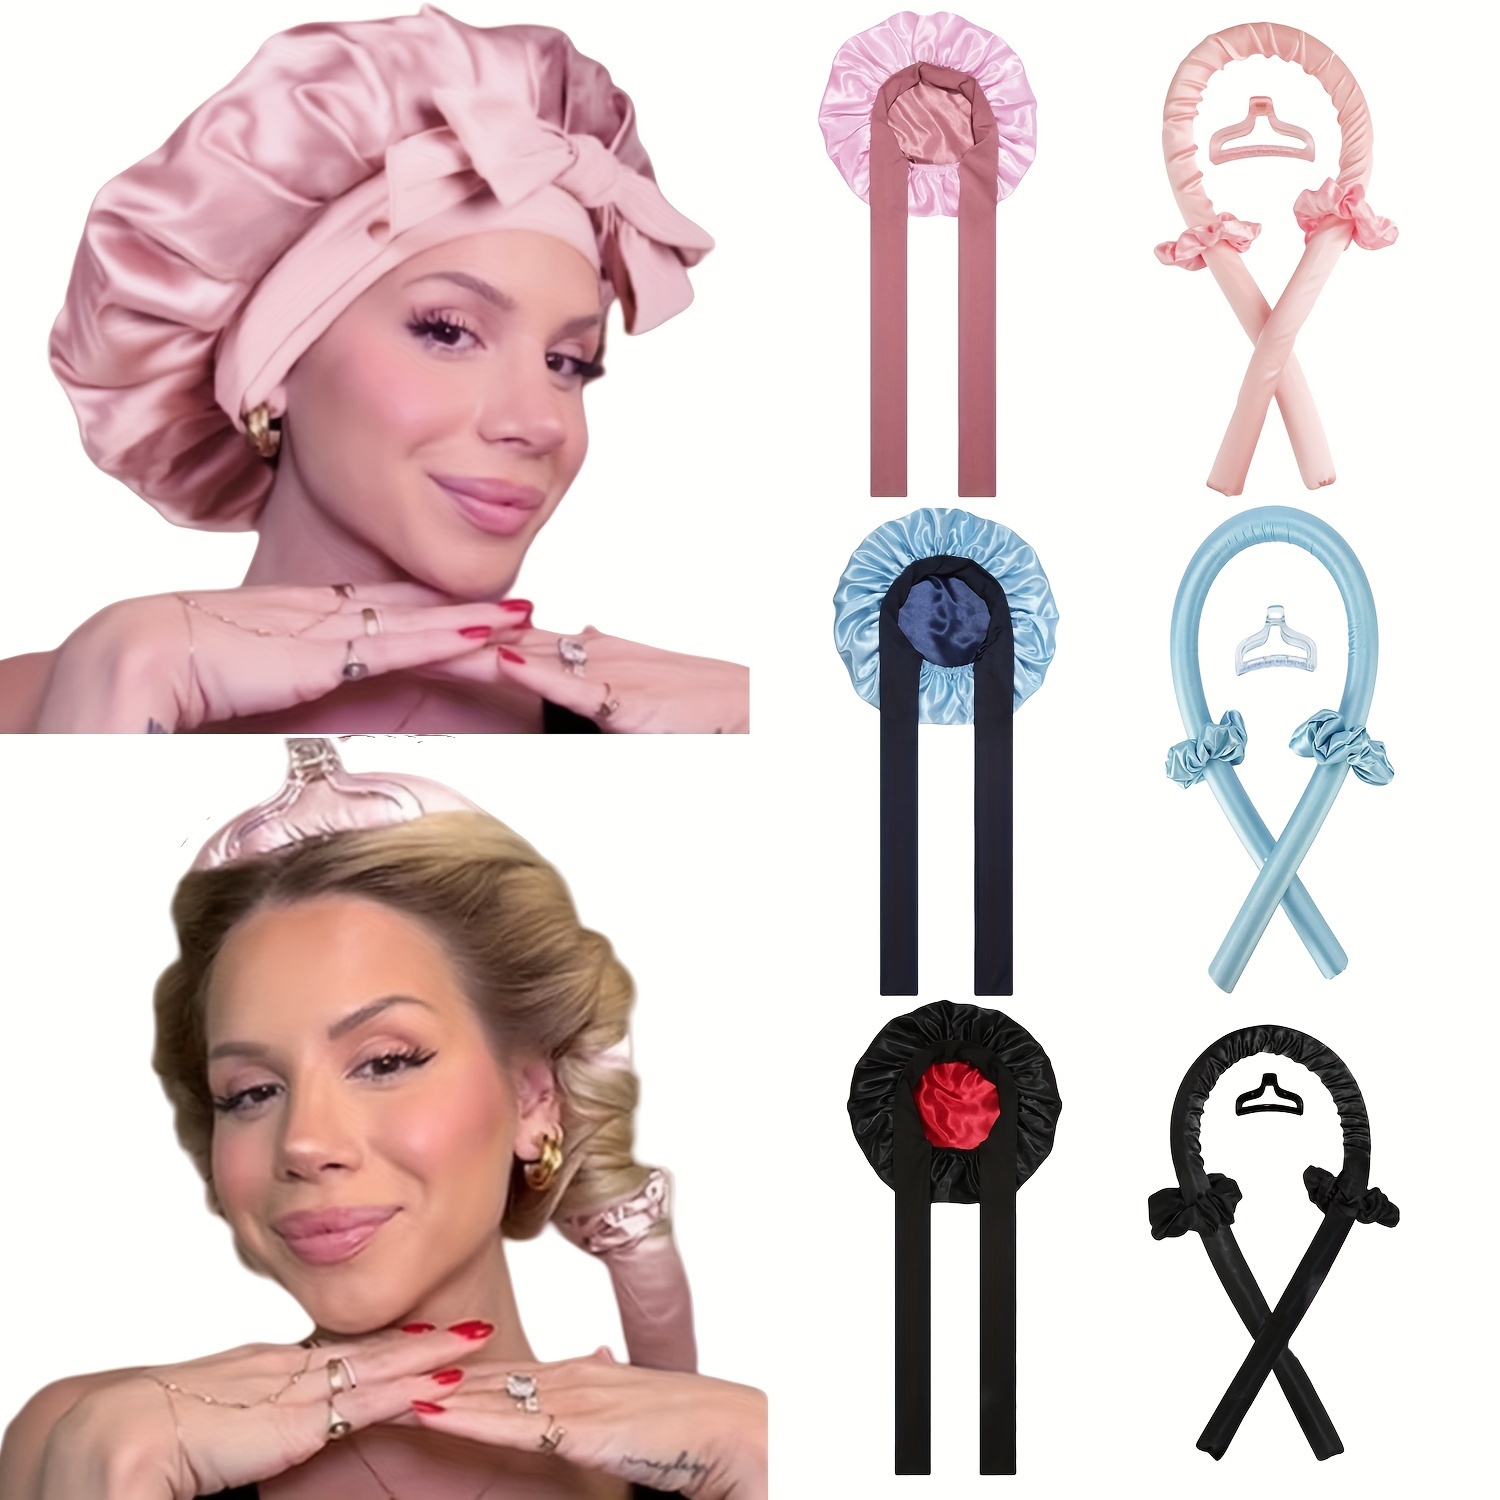 

Silk Double Layer Bonnet With Heatless Hair Curler Set, Overnight Kit To Sleep In, Satin Lined Hair Bonnet And Heatless Curls Headband For Women Natural Curly